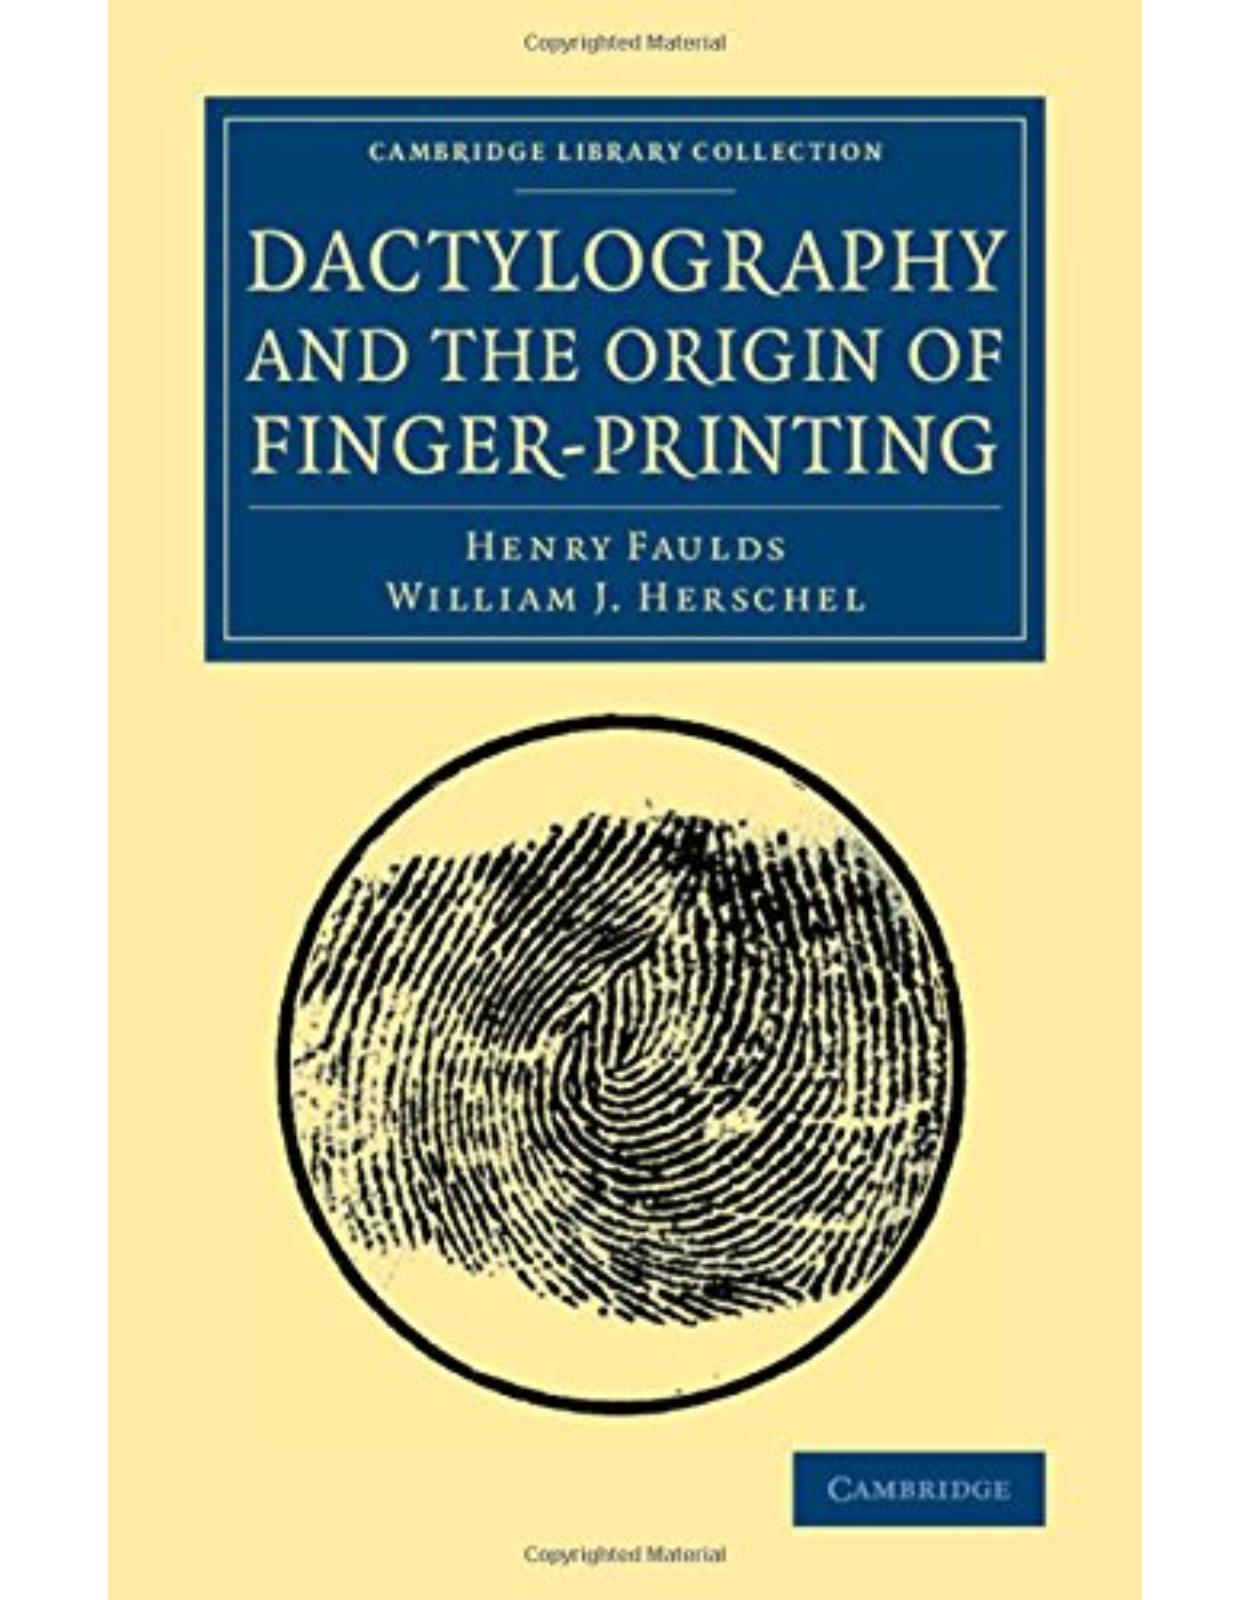 Dactylography and The Origin of Finger-Printing (Cambridge Library Collection - British and Irish History, 19th Century)